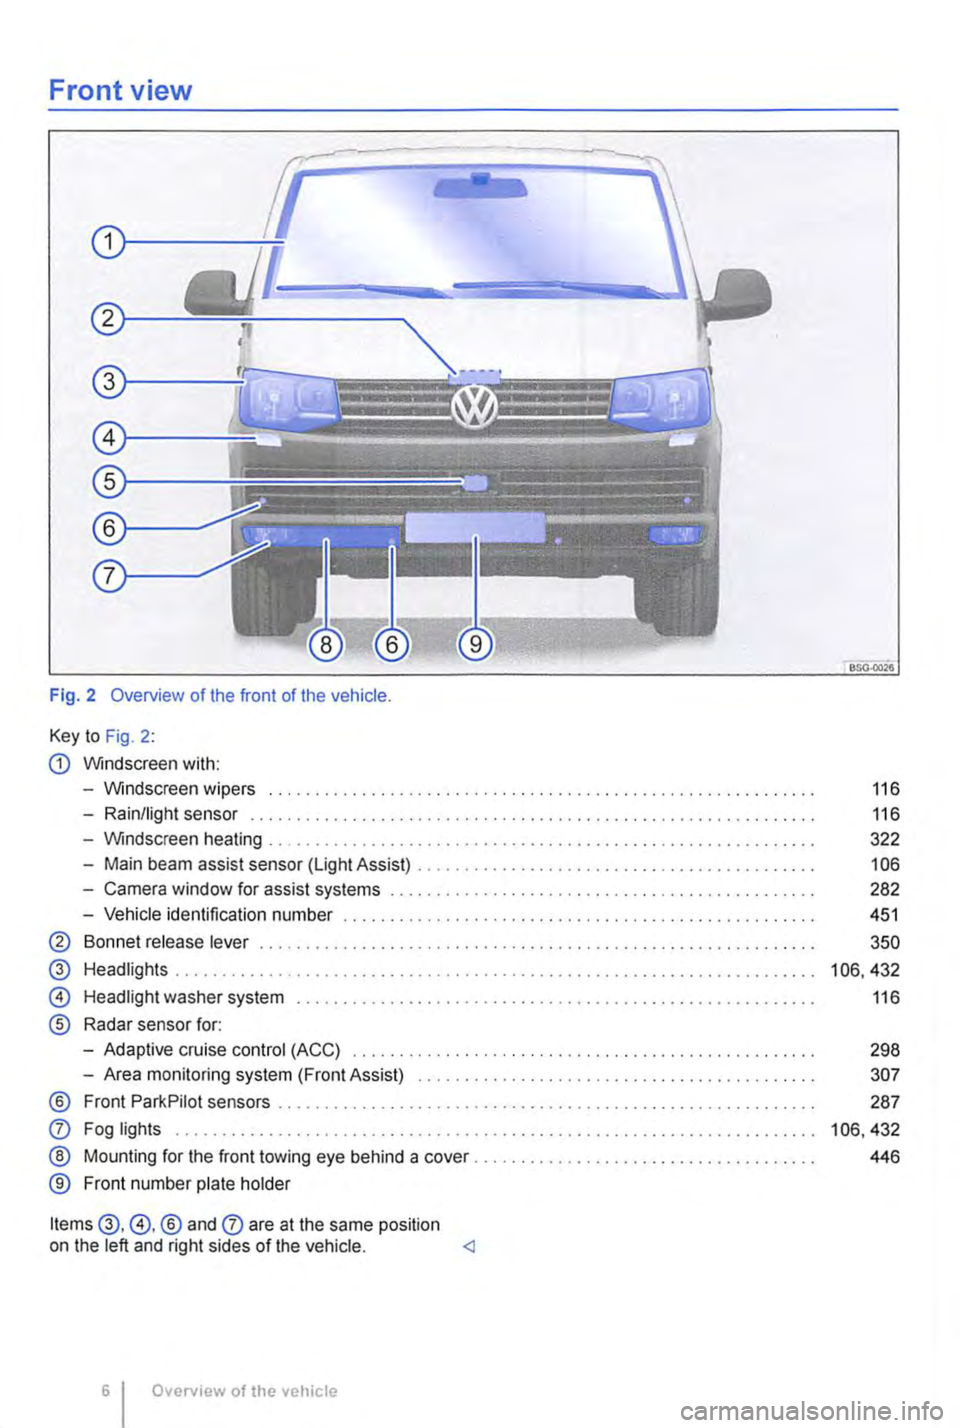 VOLKSWAGEN TRANSPORTER 2015  Owner´s Manual Front view 
Fig. 2 Overview of the front of the vehicle. 
Key to Fig. 2: 
G) Windscreen with: 
-Windscreen wipers .............. . 
-Rain/light sensor .............. . 
-Windscreen heating 
-Main beam